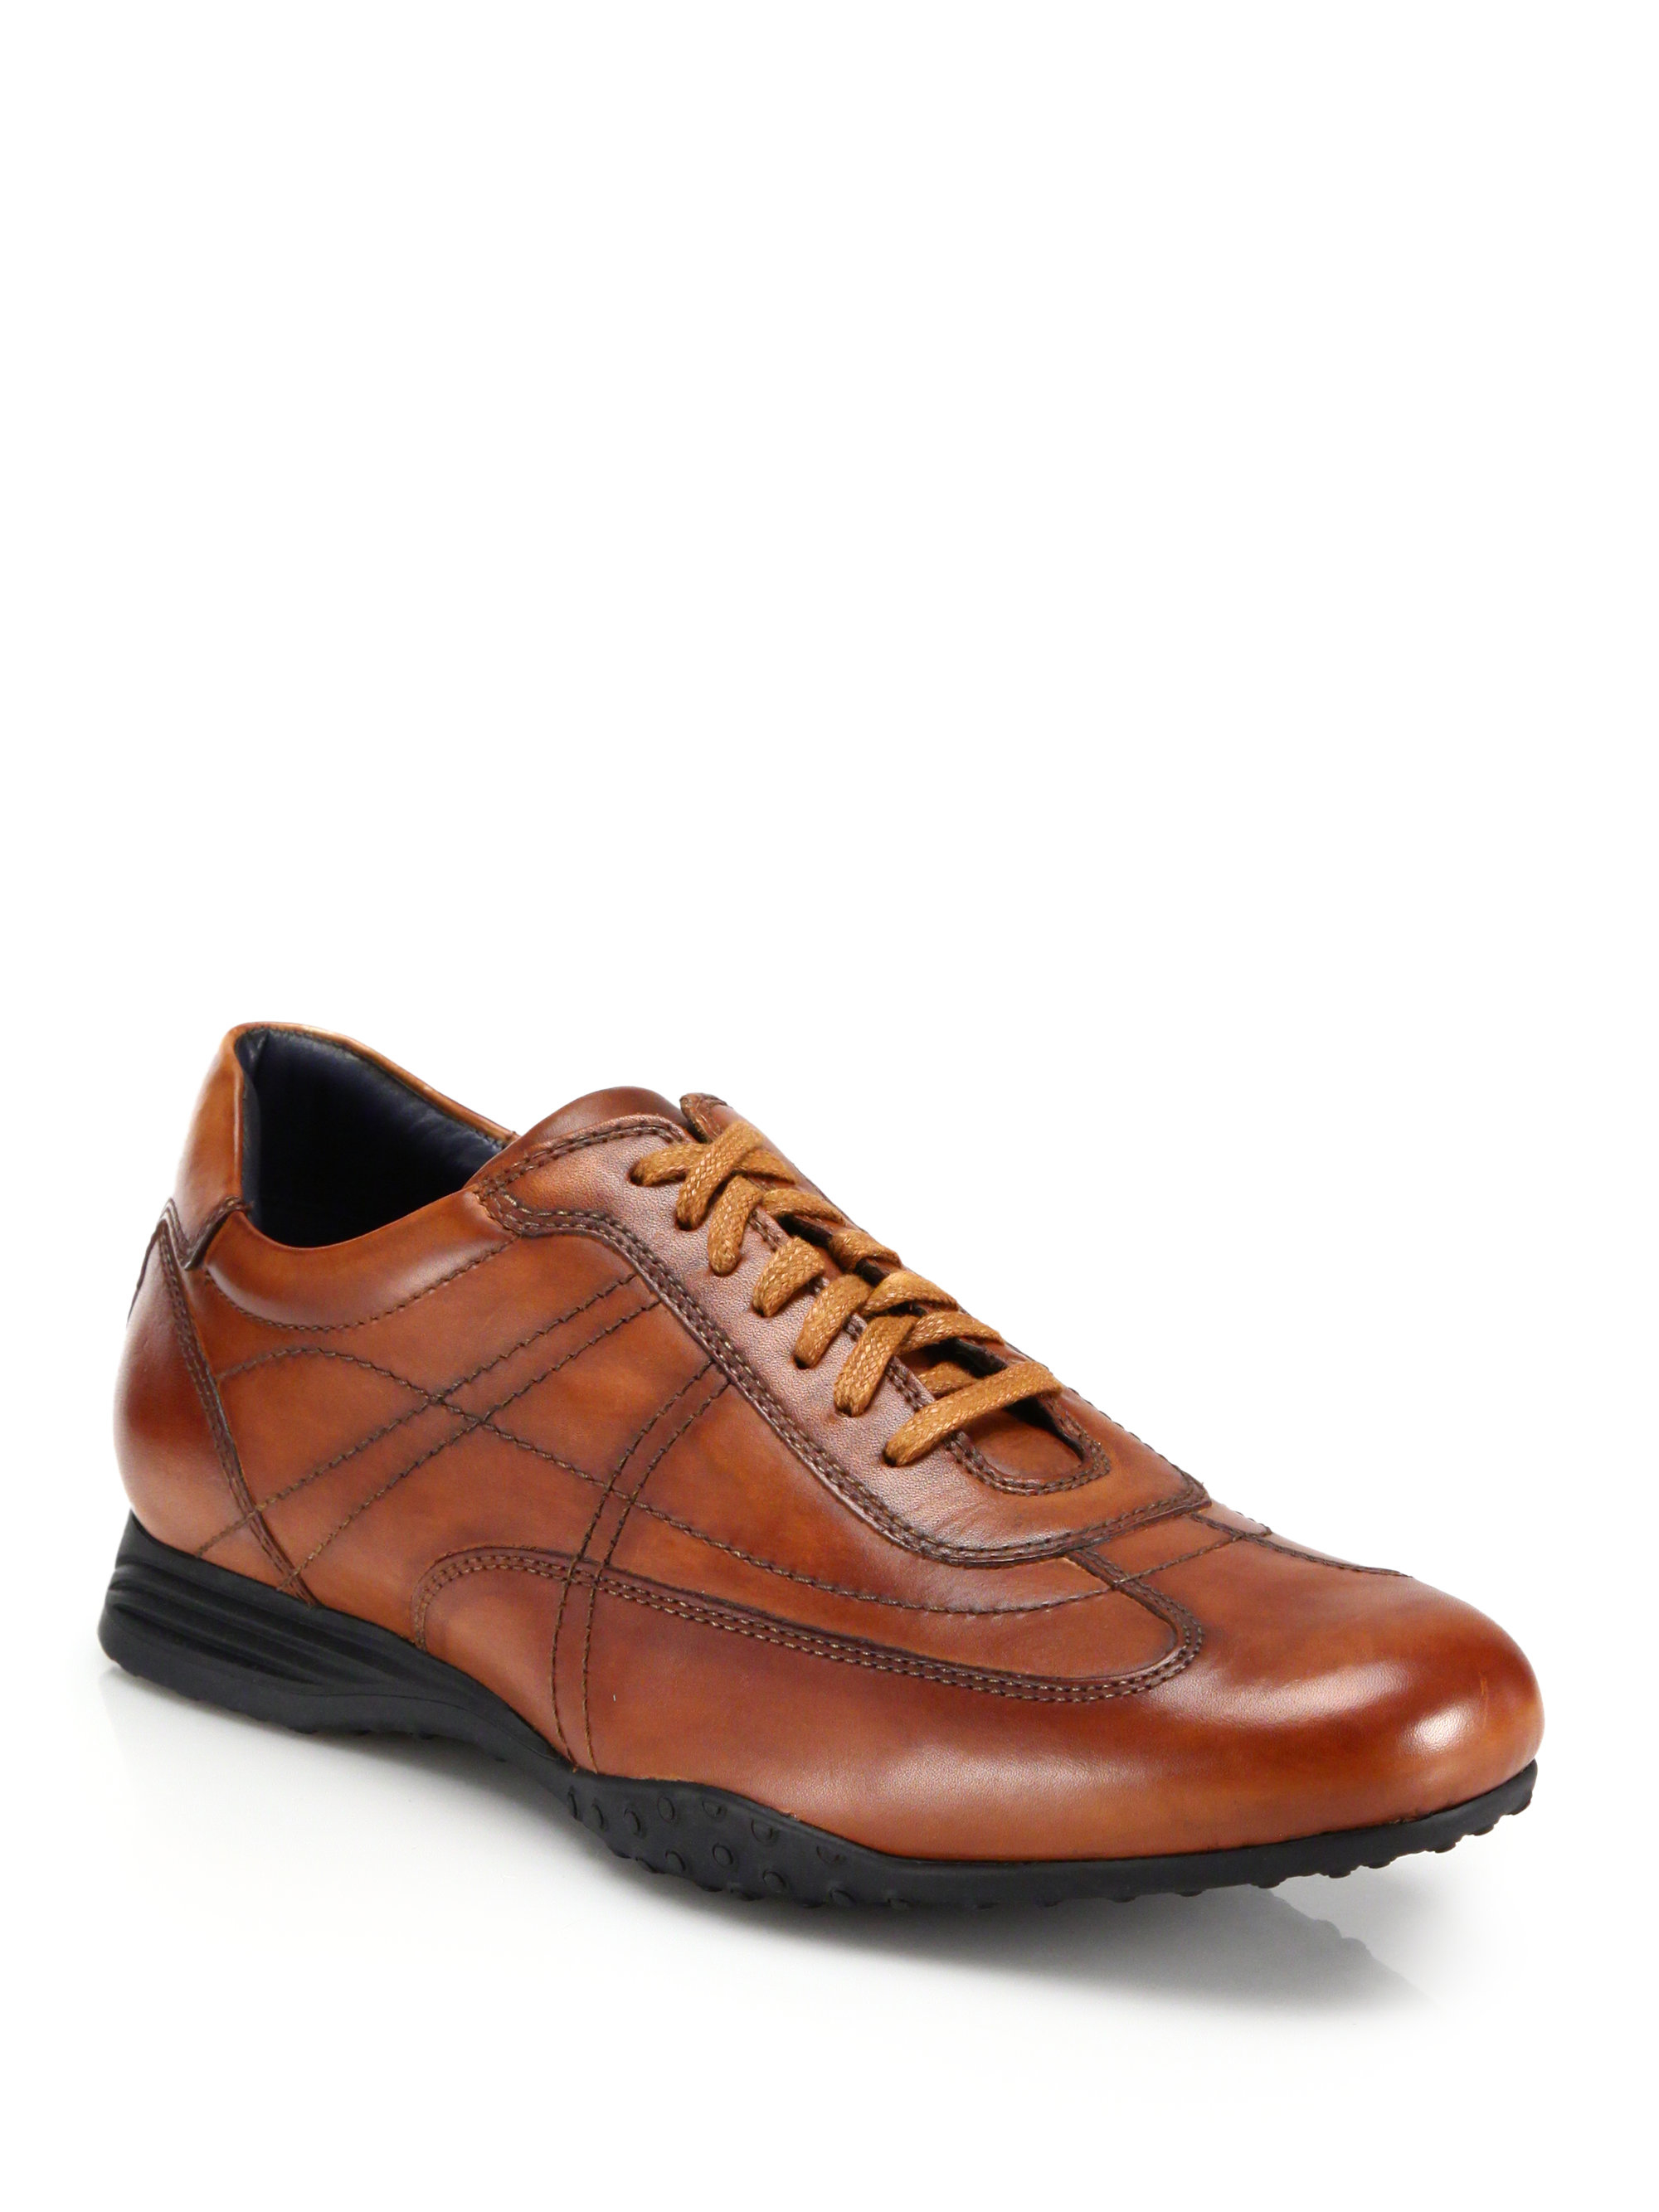 Lyst - Cole Haan Granada Leather Sport Oxford Sneakers in Brown for Men